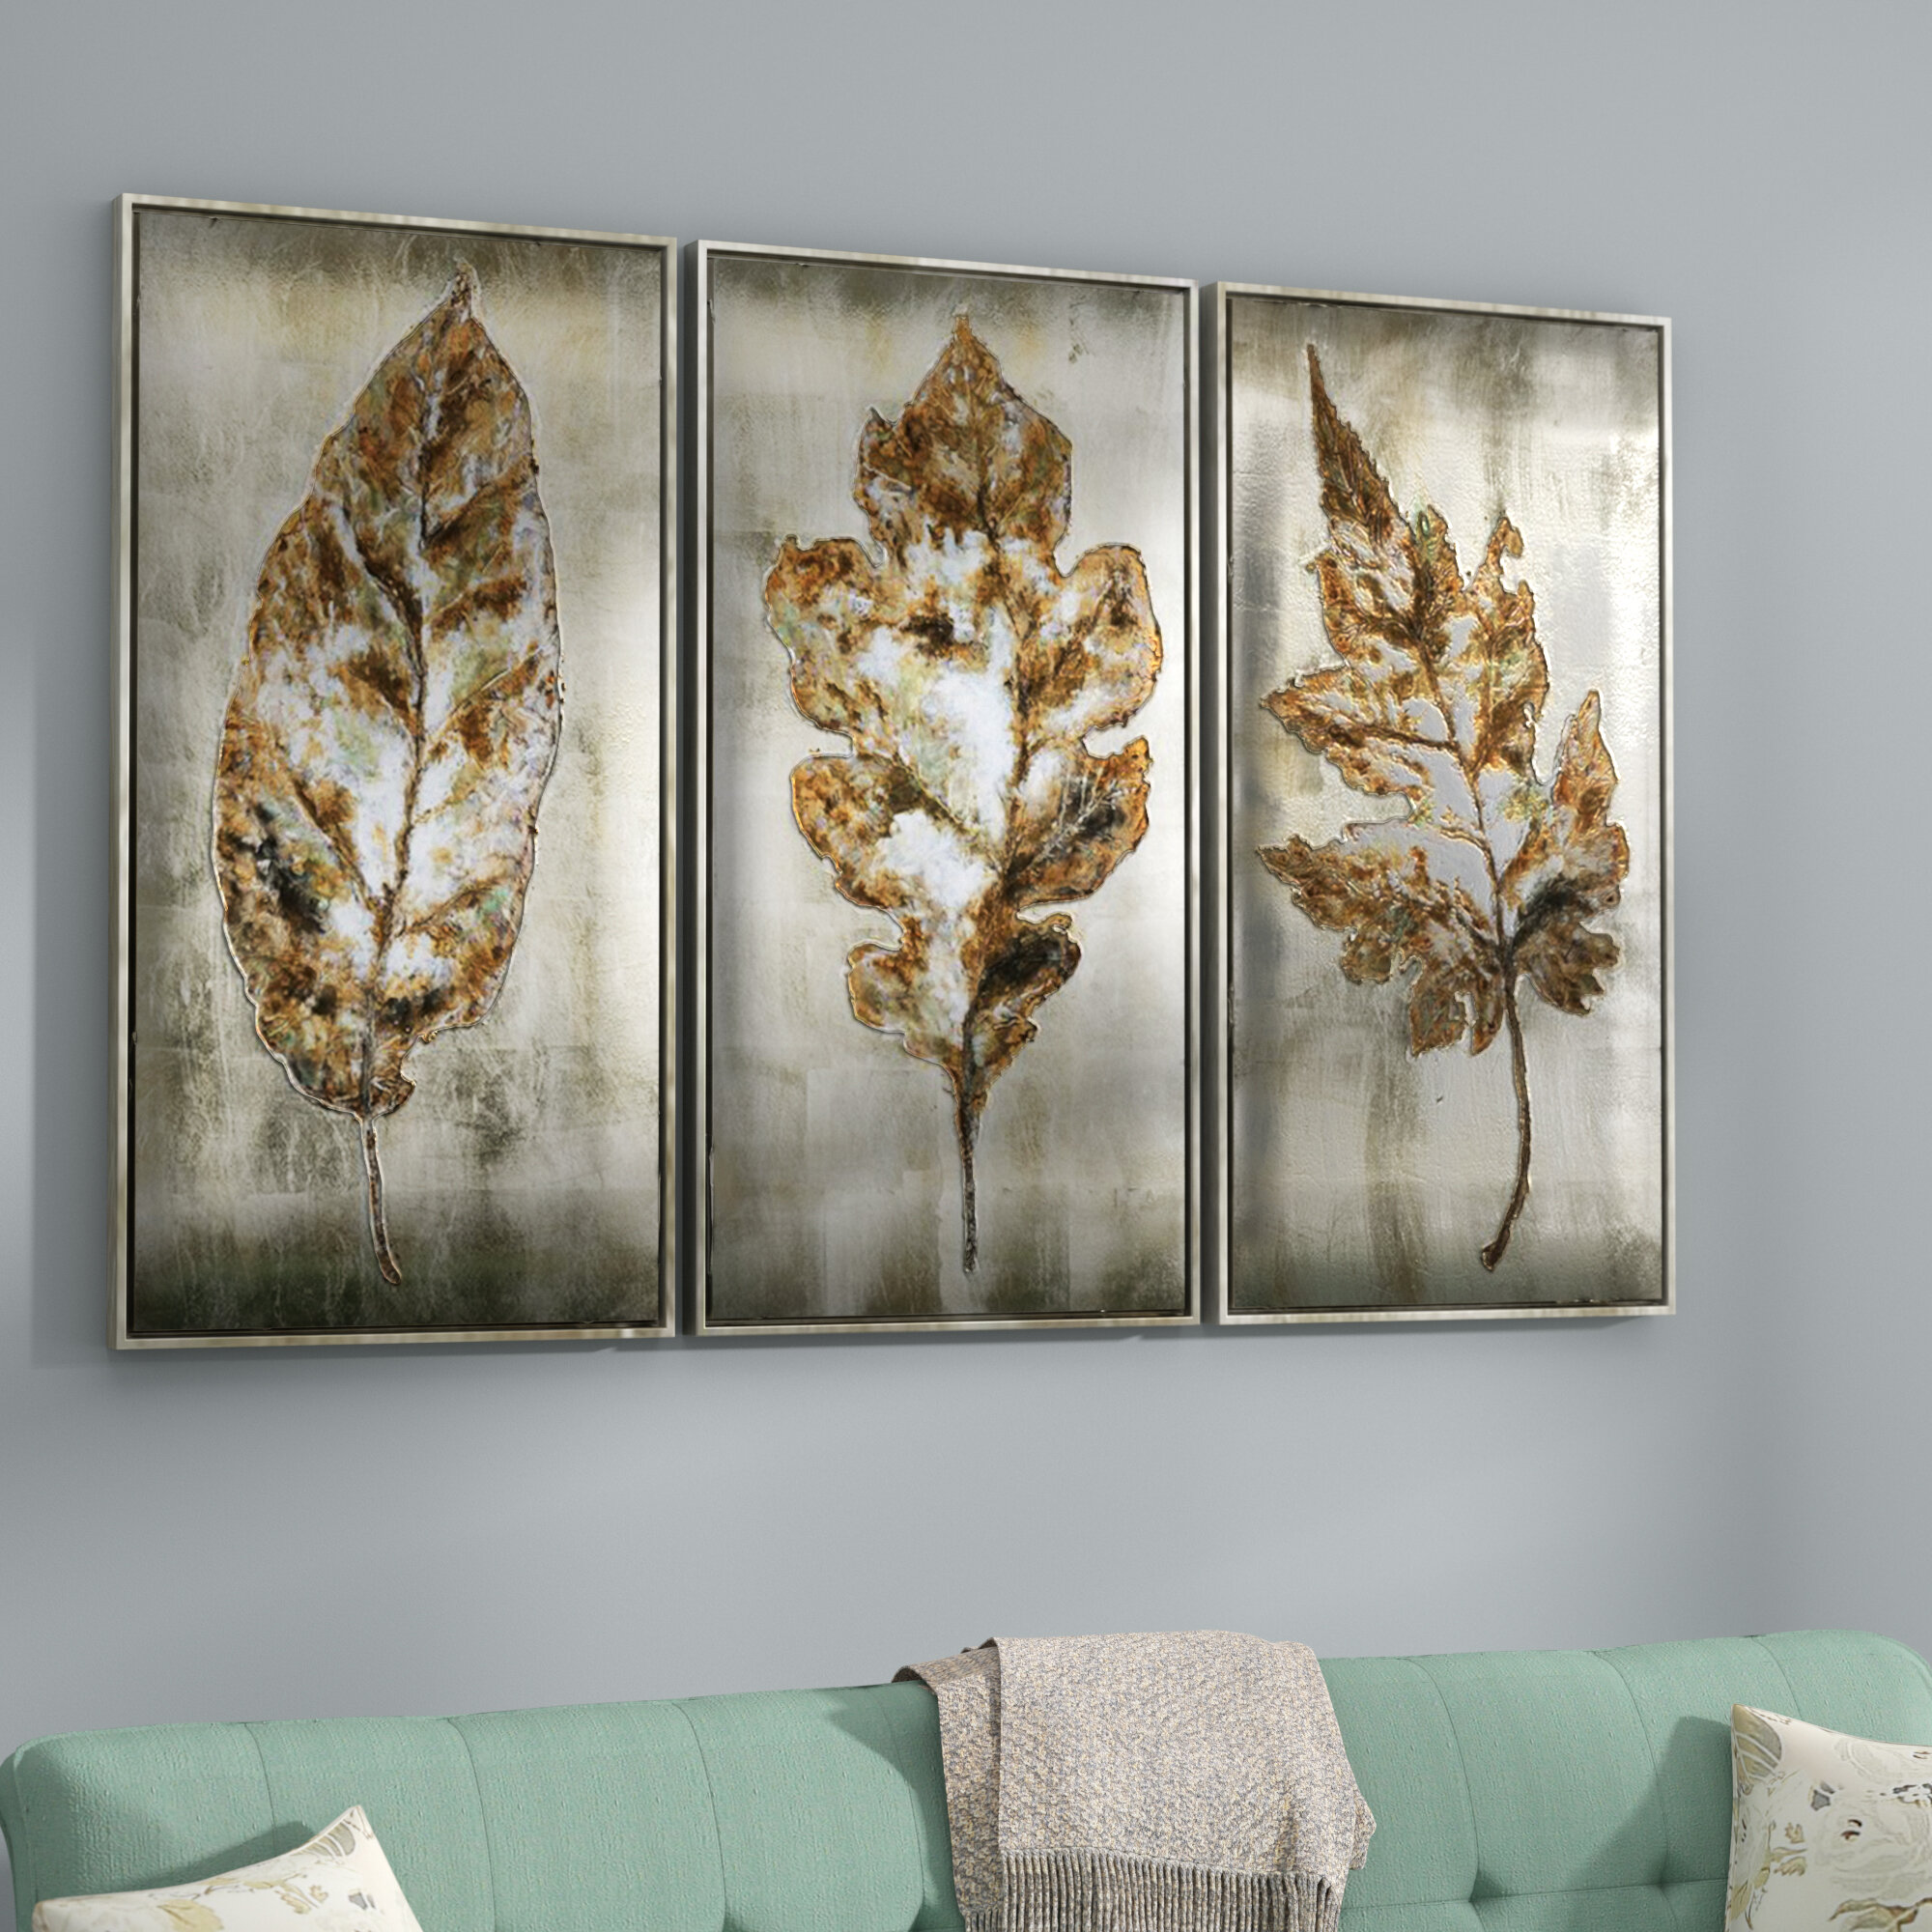 Darby Home Co Leaves Modern 3 Piece Framed Painting Set Reviews Wayfair